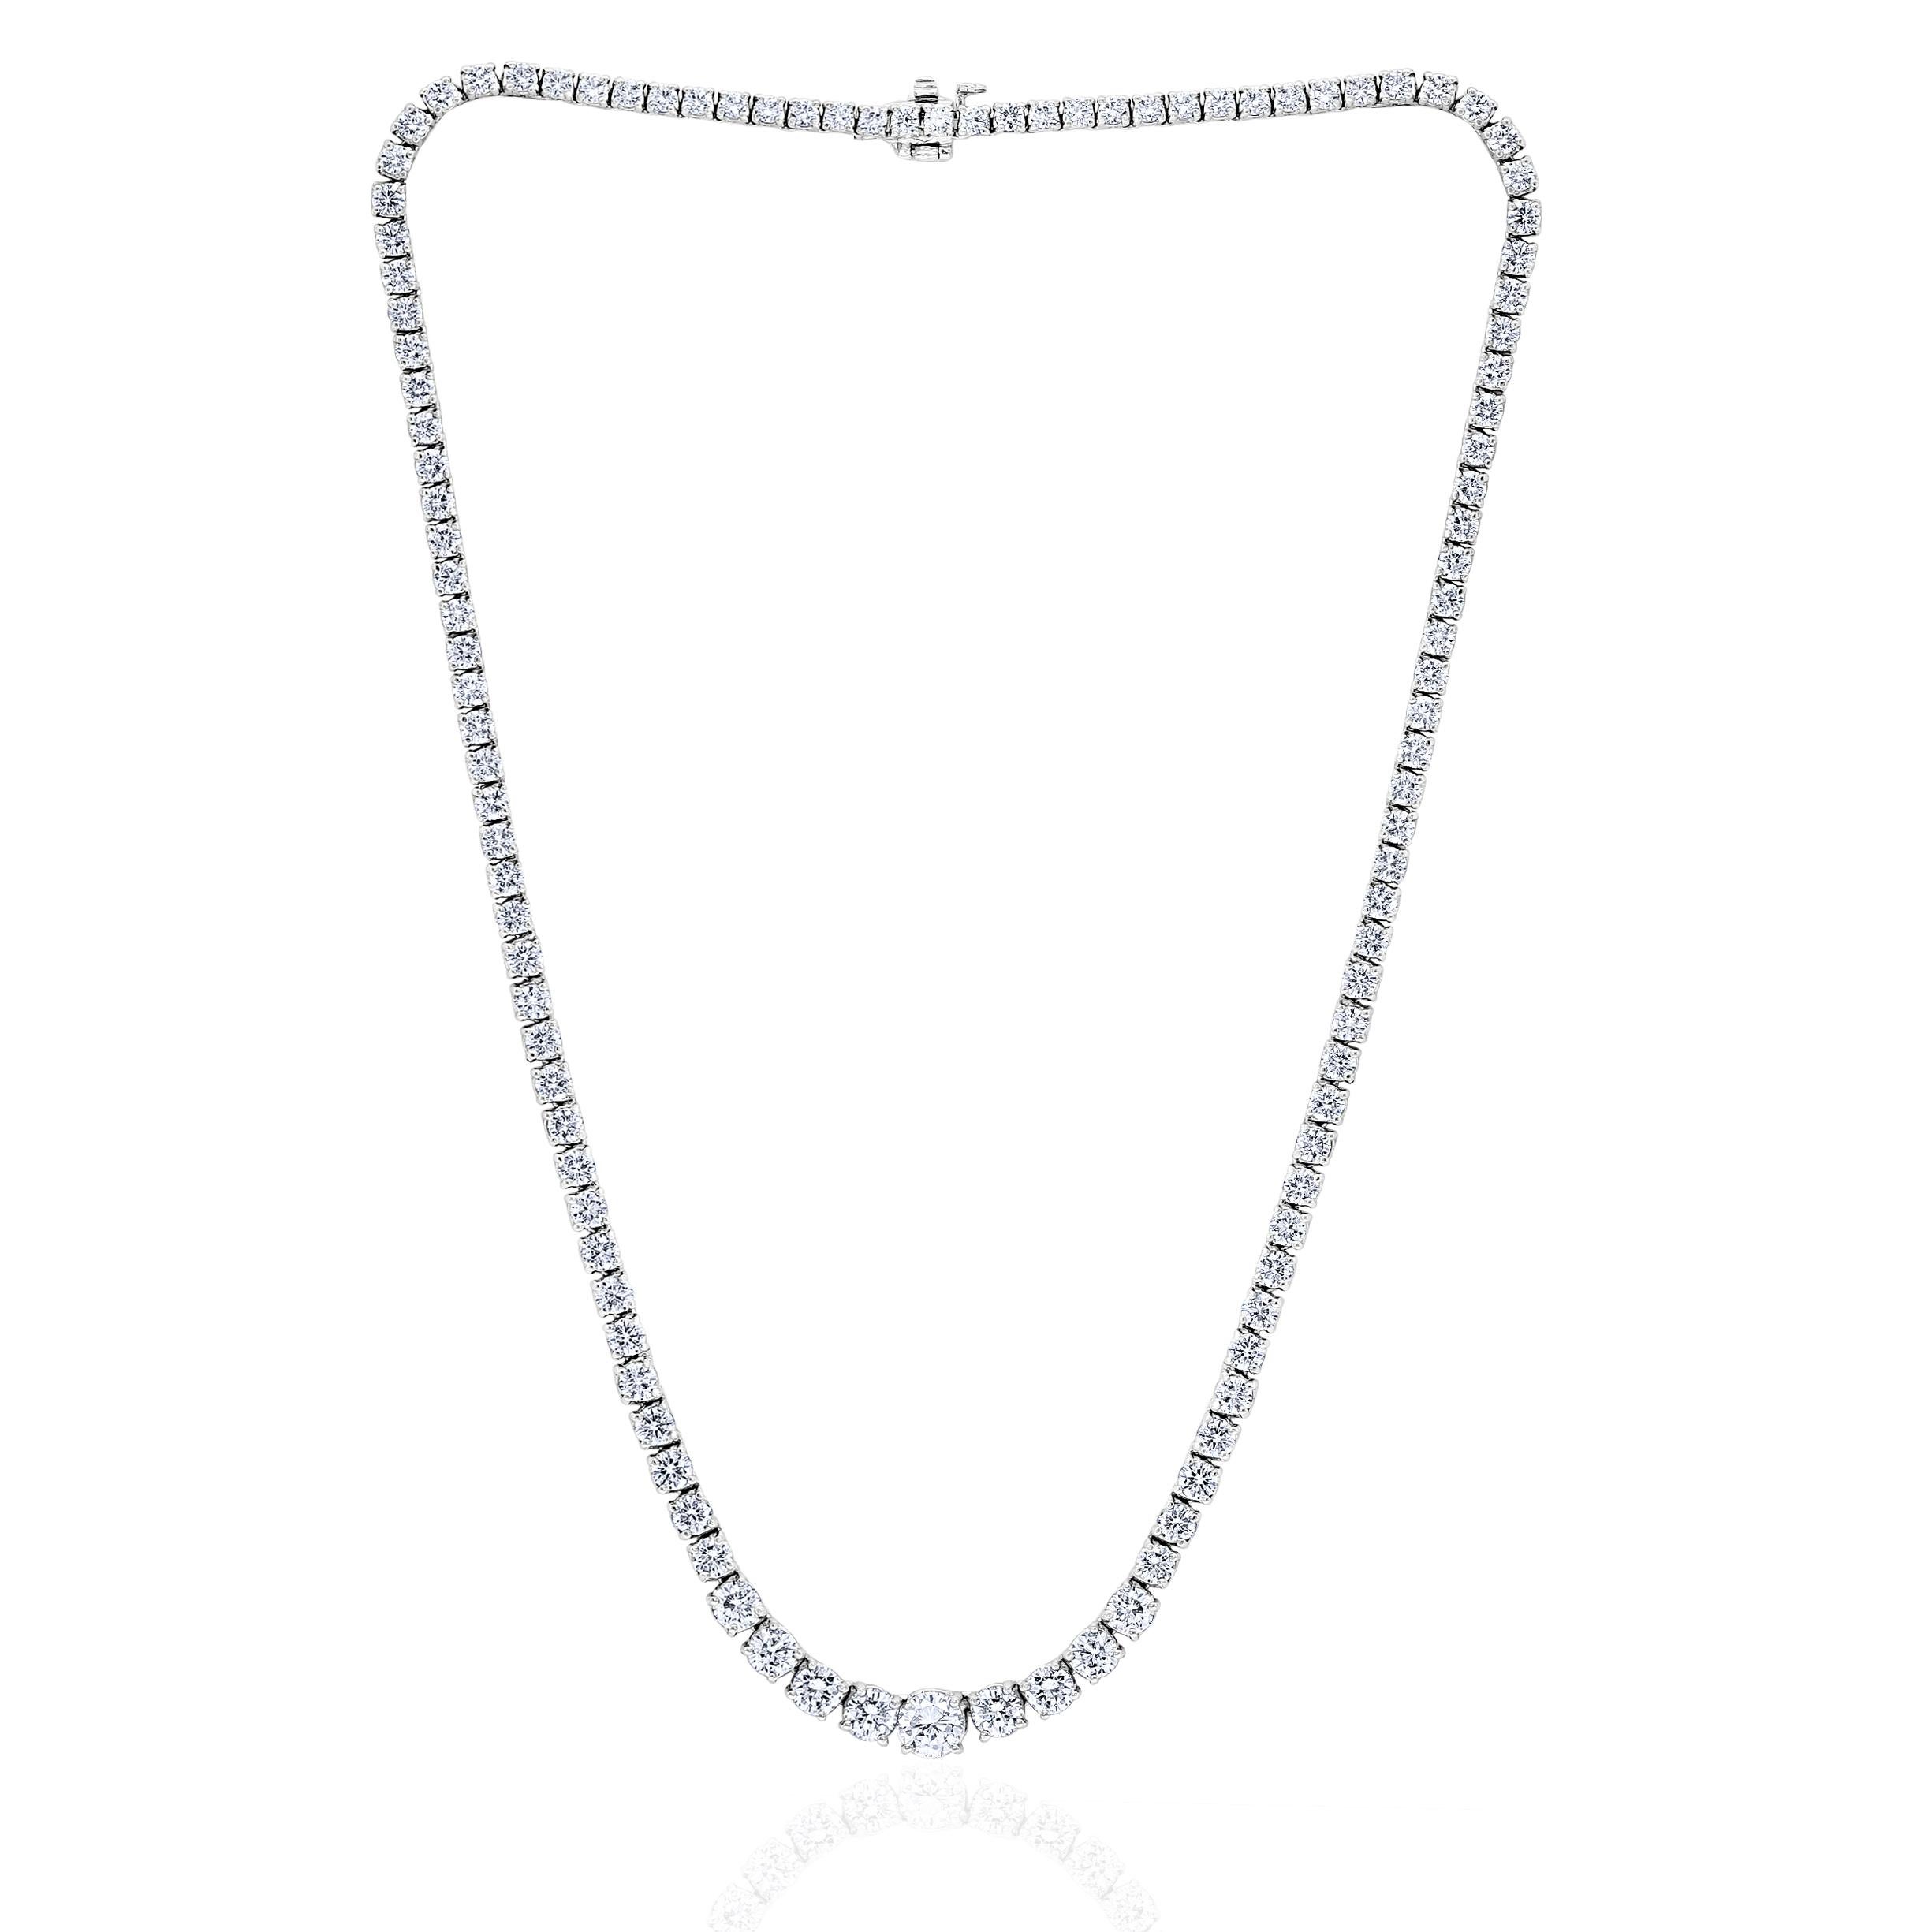 A series of graduated Round Diamonds in a Tennis Necklace setting.

Diamonds are of H-I color and SI clarity.
Set in White Gold.
13.20 Carat Total Weight

Measures 17 inches